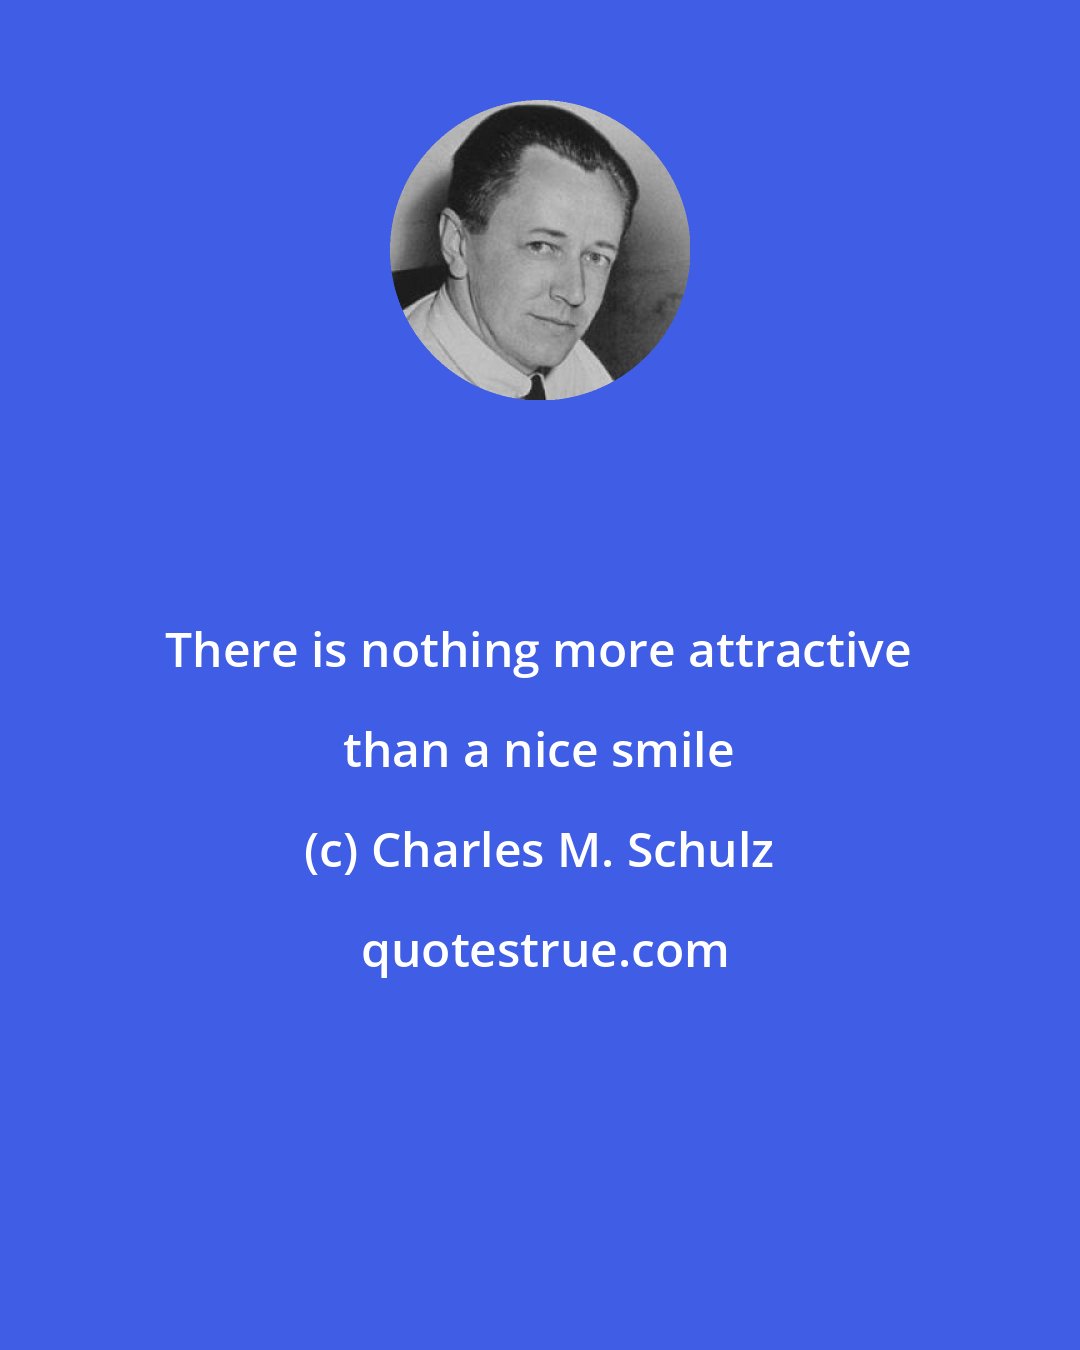 Charles M. Schulz: There is nothing more attractive than a nice smile